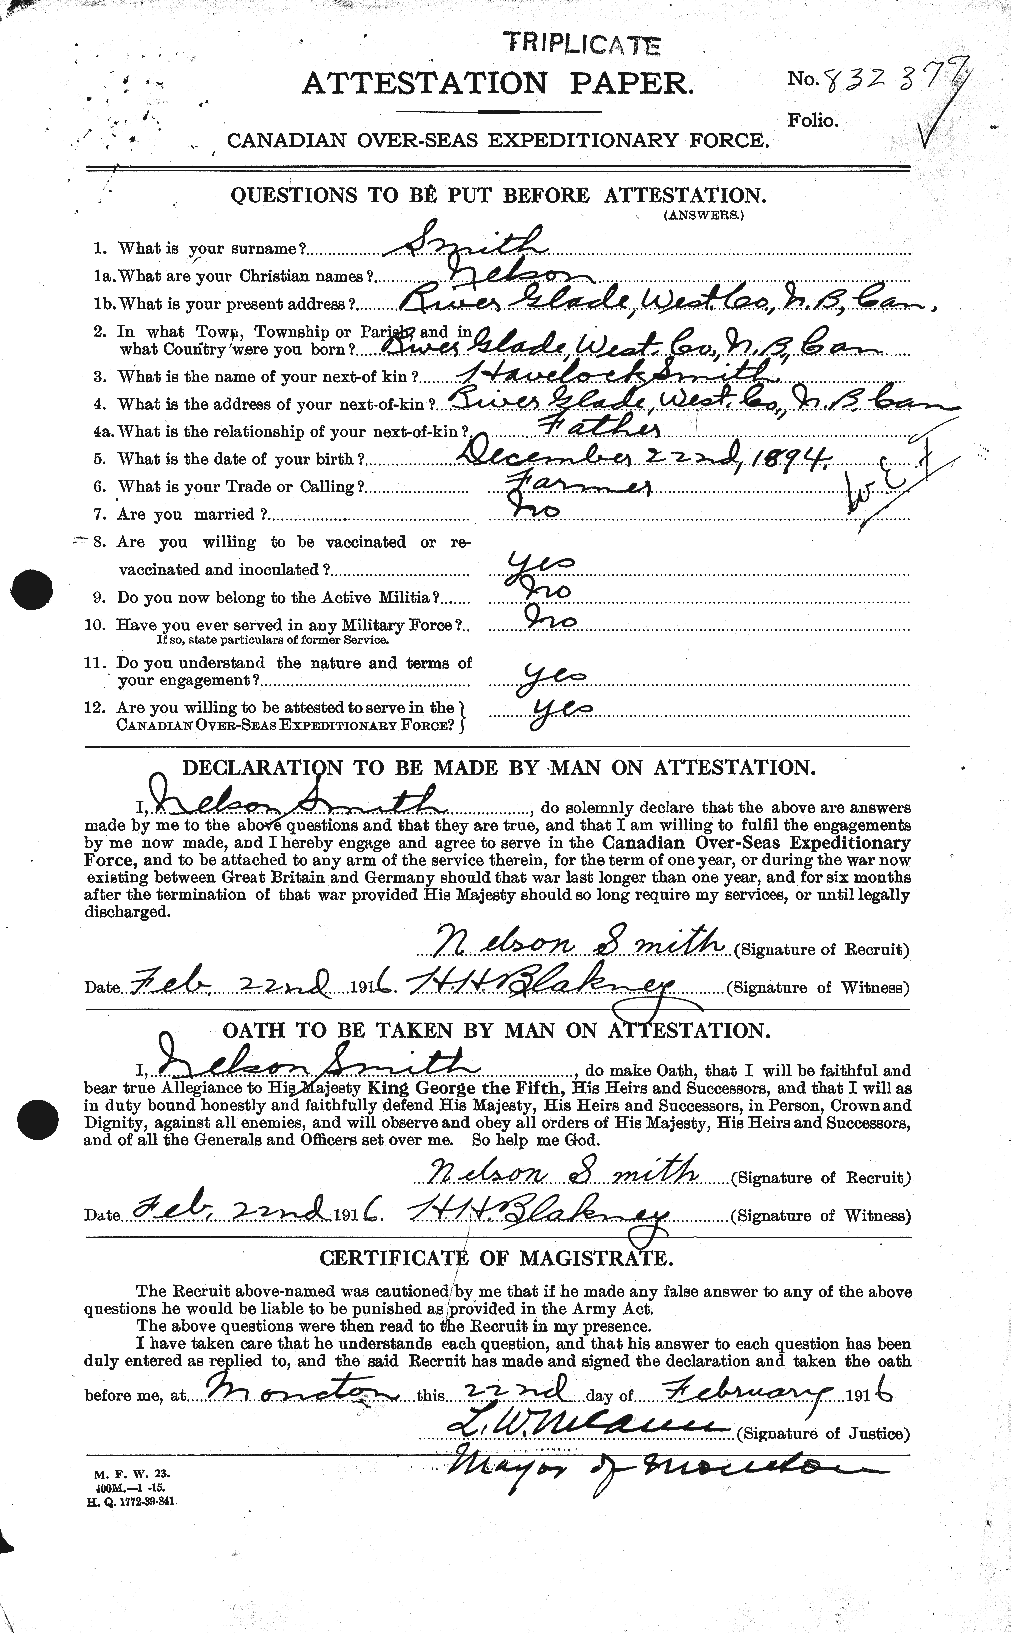 Personnel Records of the First World War - CEF 104172a